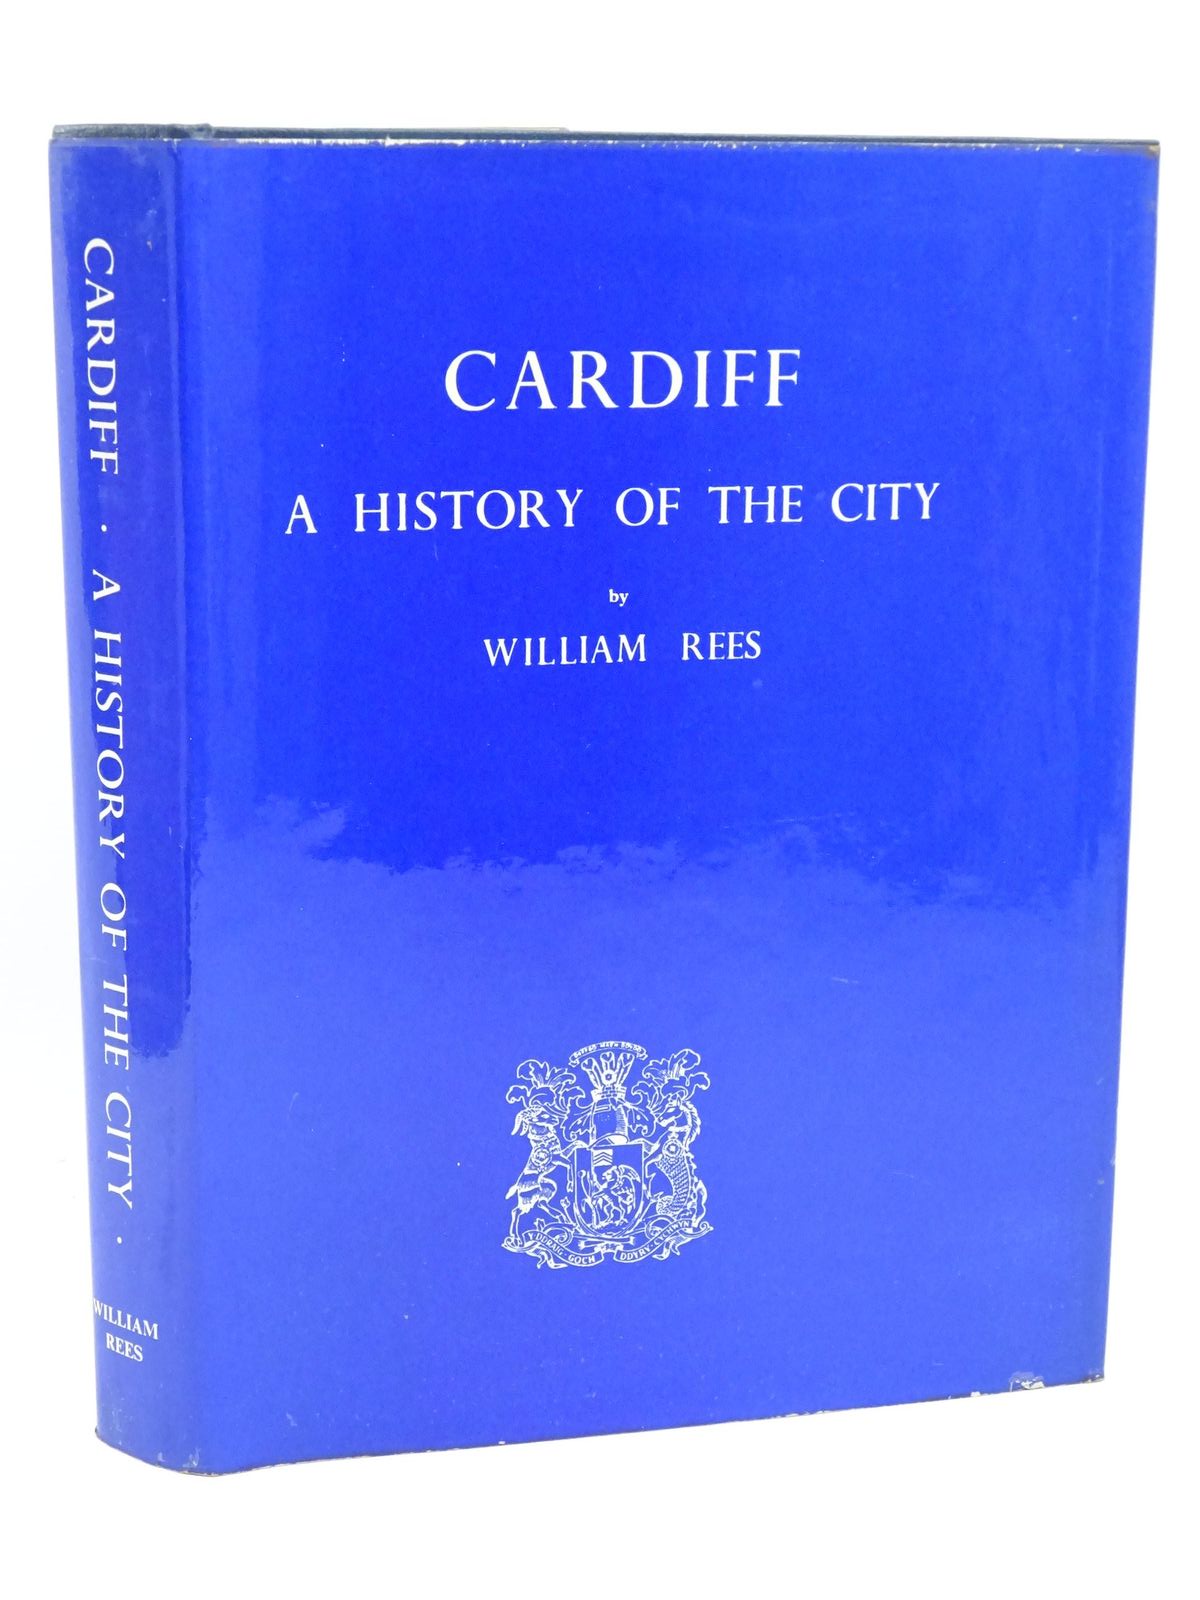 Cardiff A History Of The City